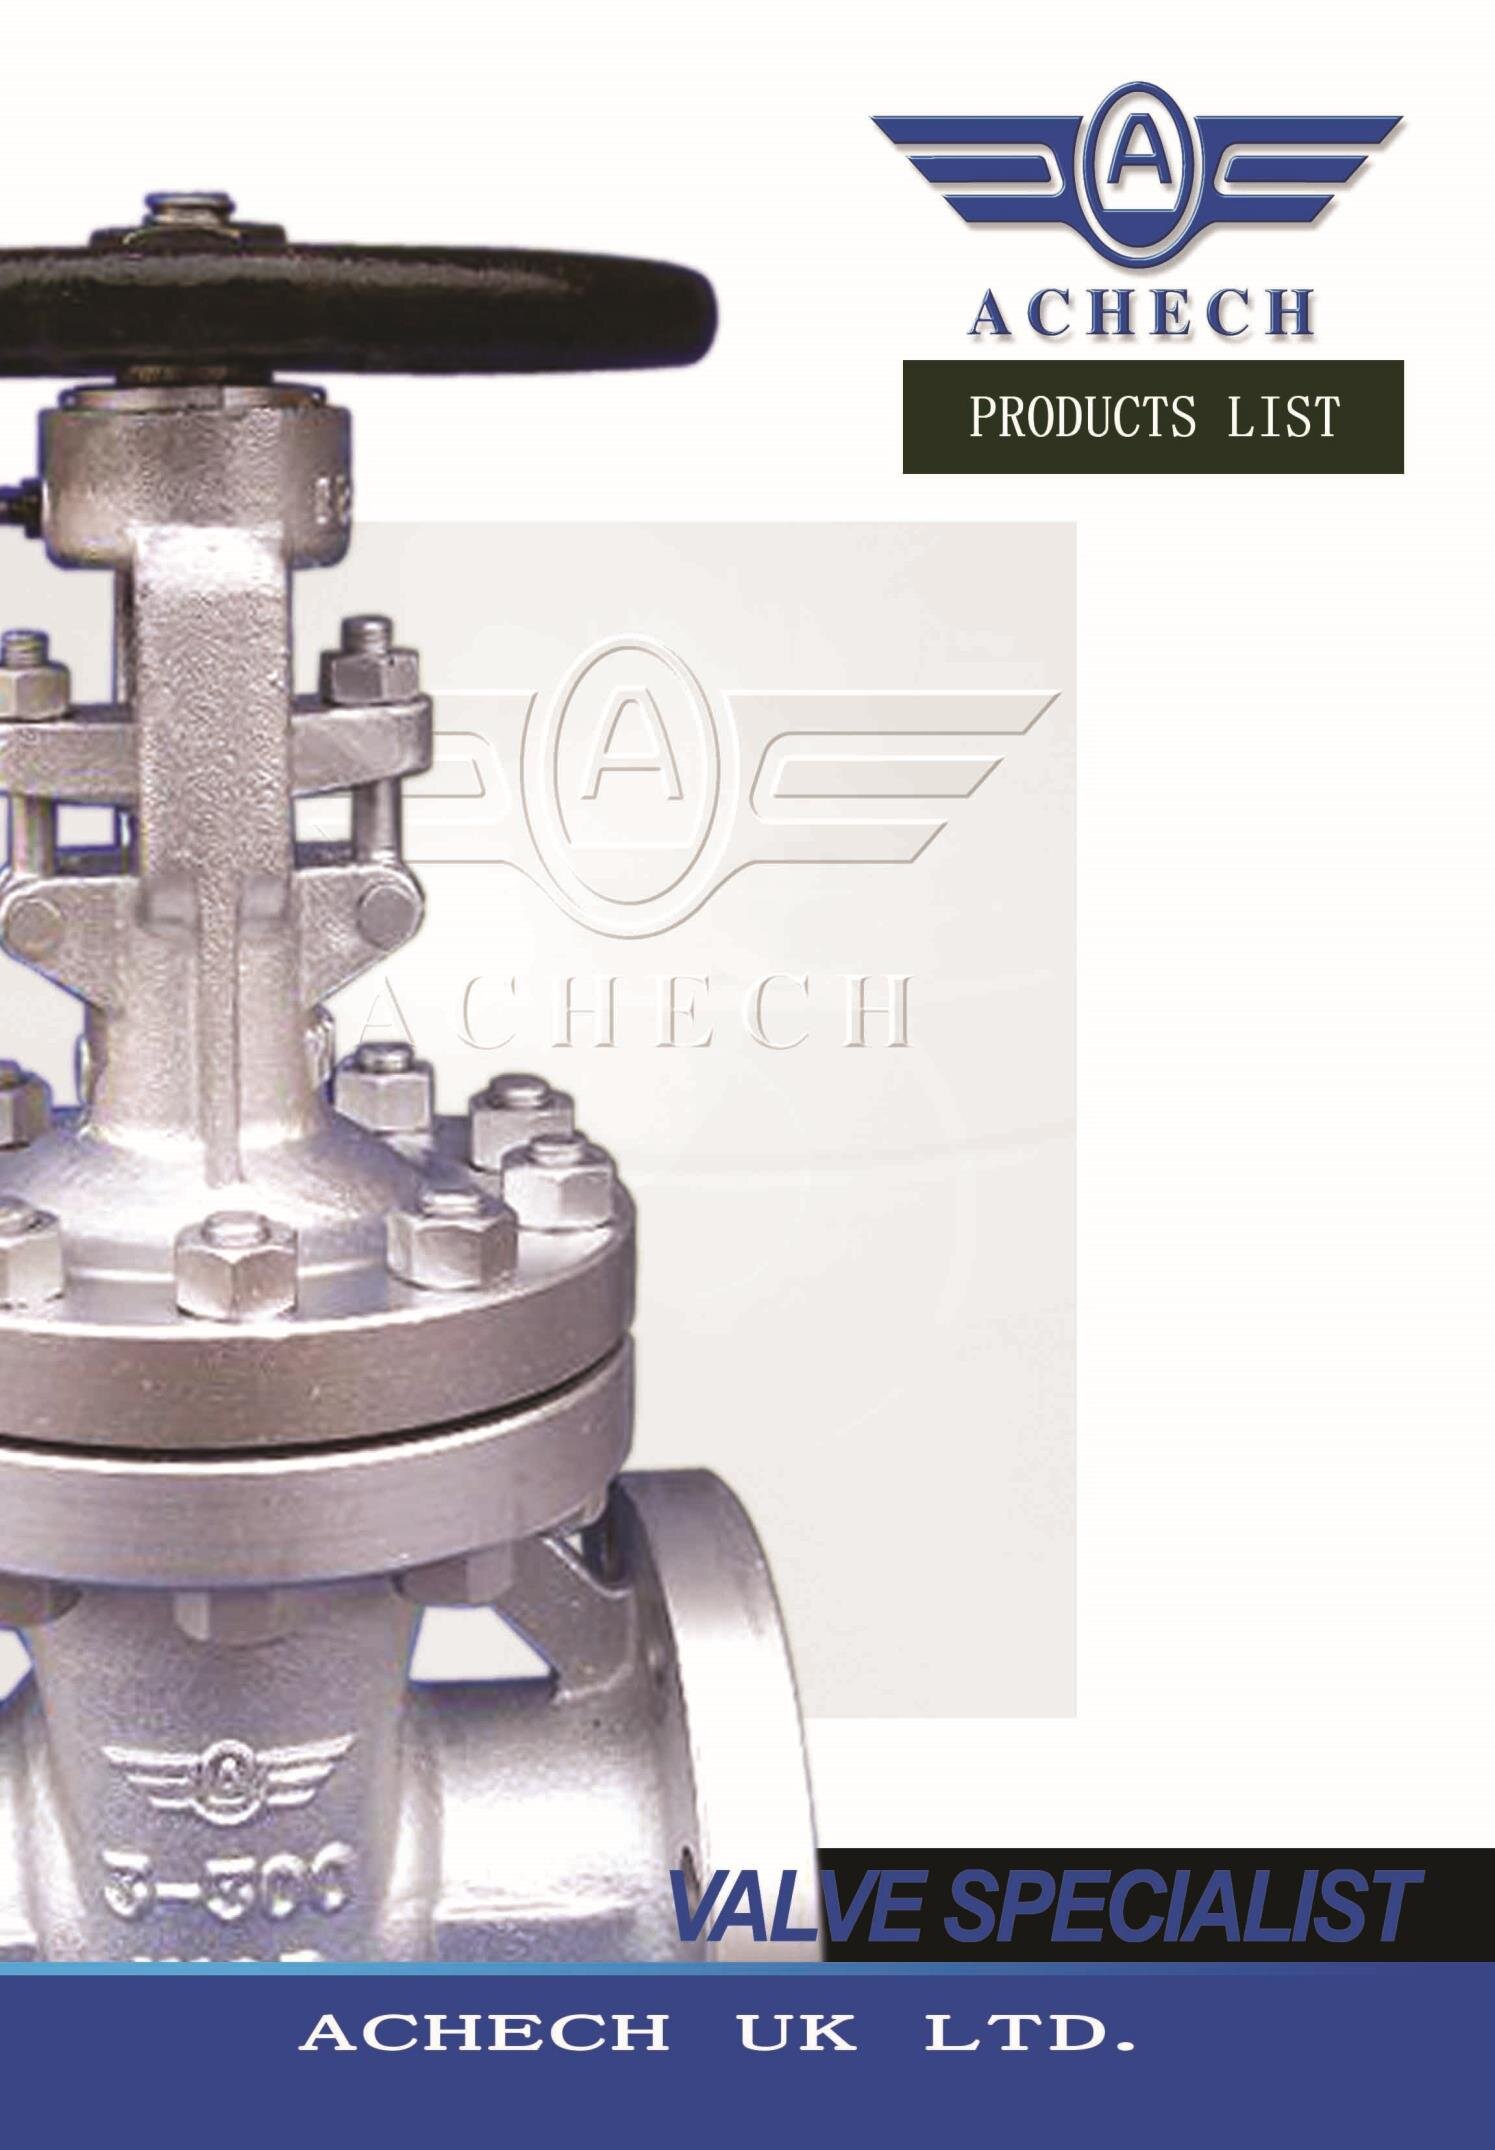 ACHECH PRODUCTS LIST_Page_01_Image_0001.jpg